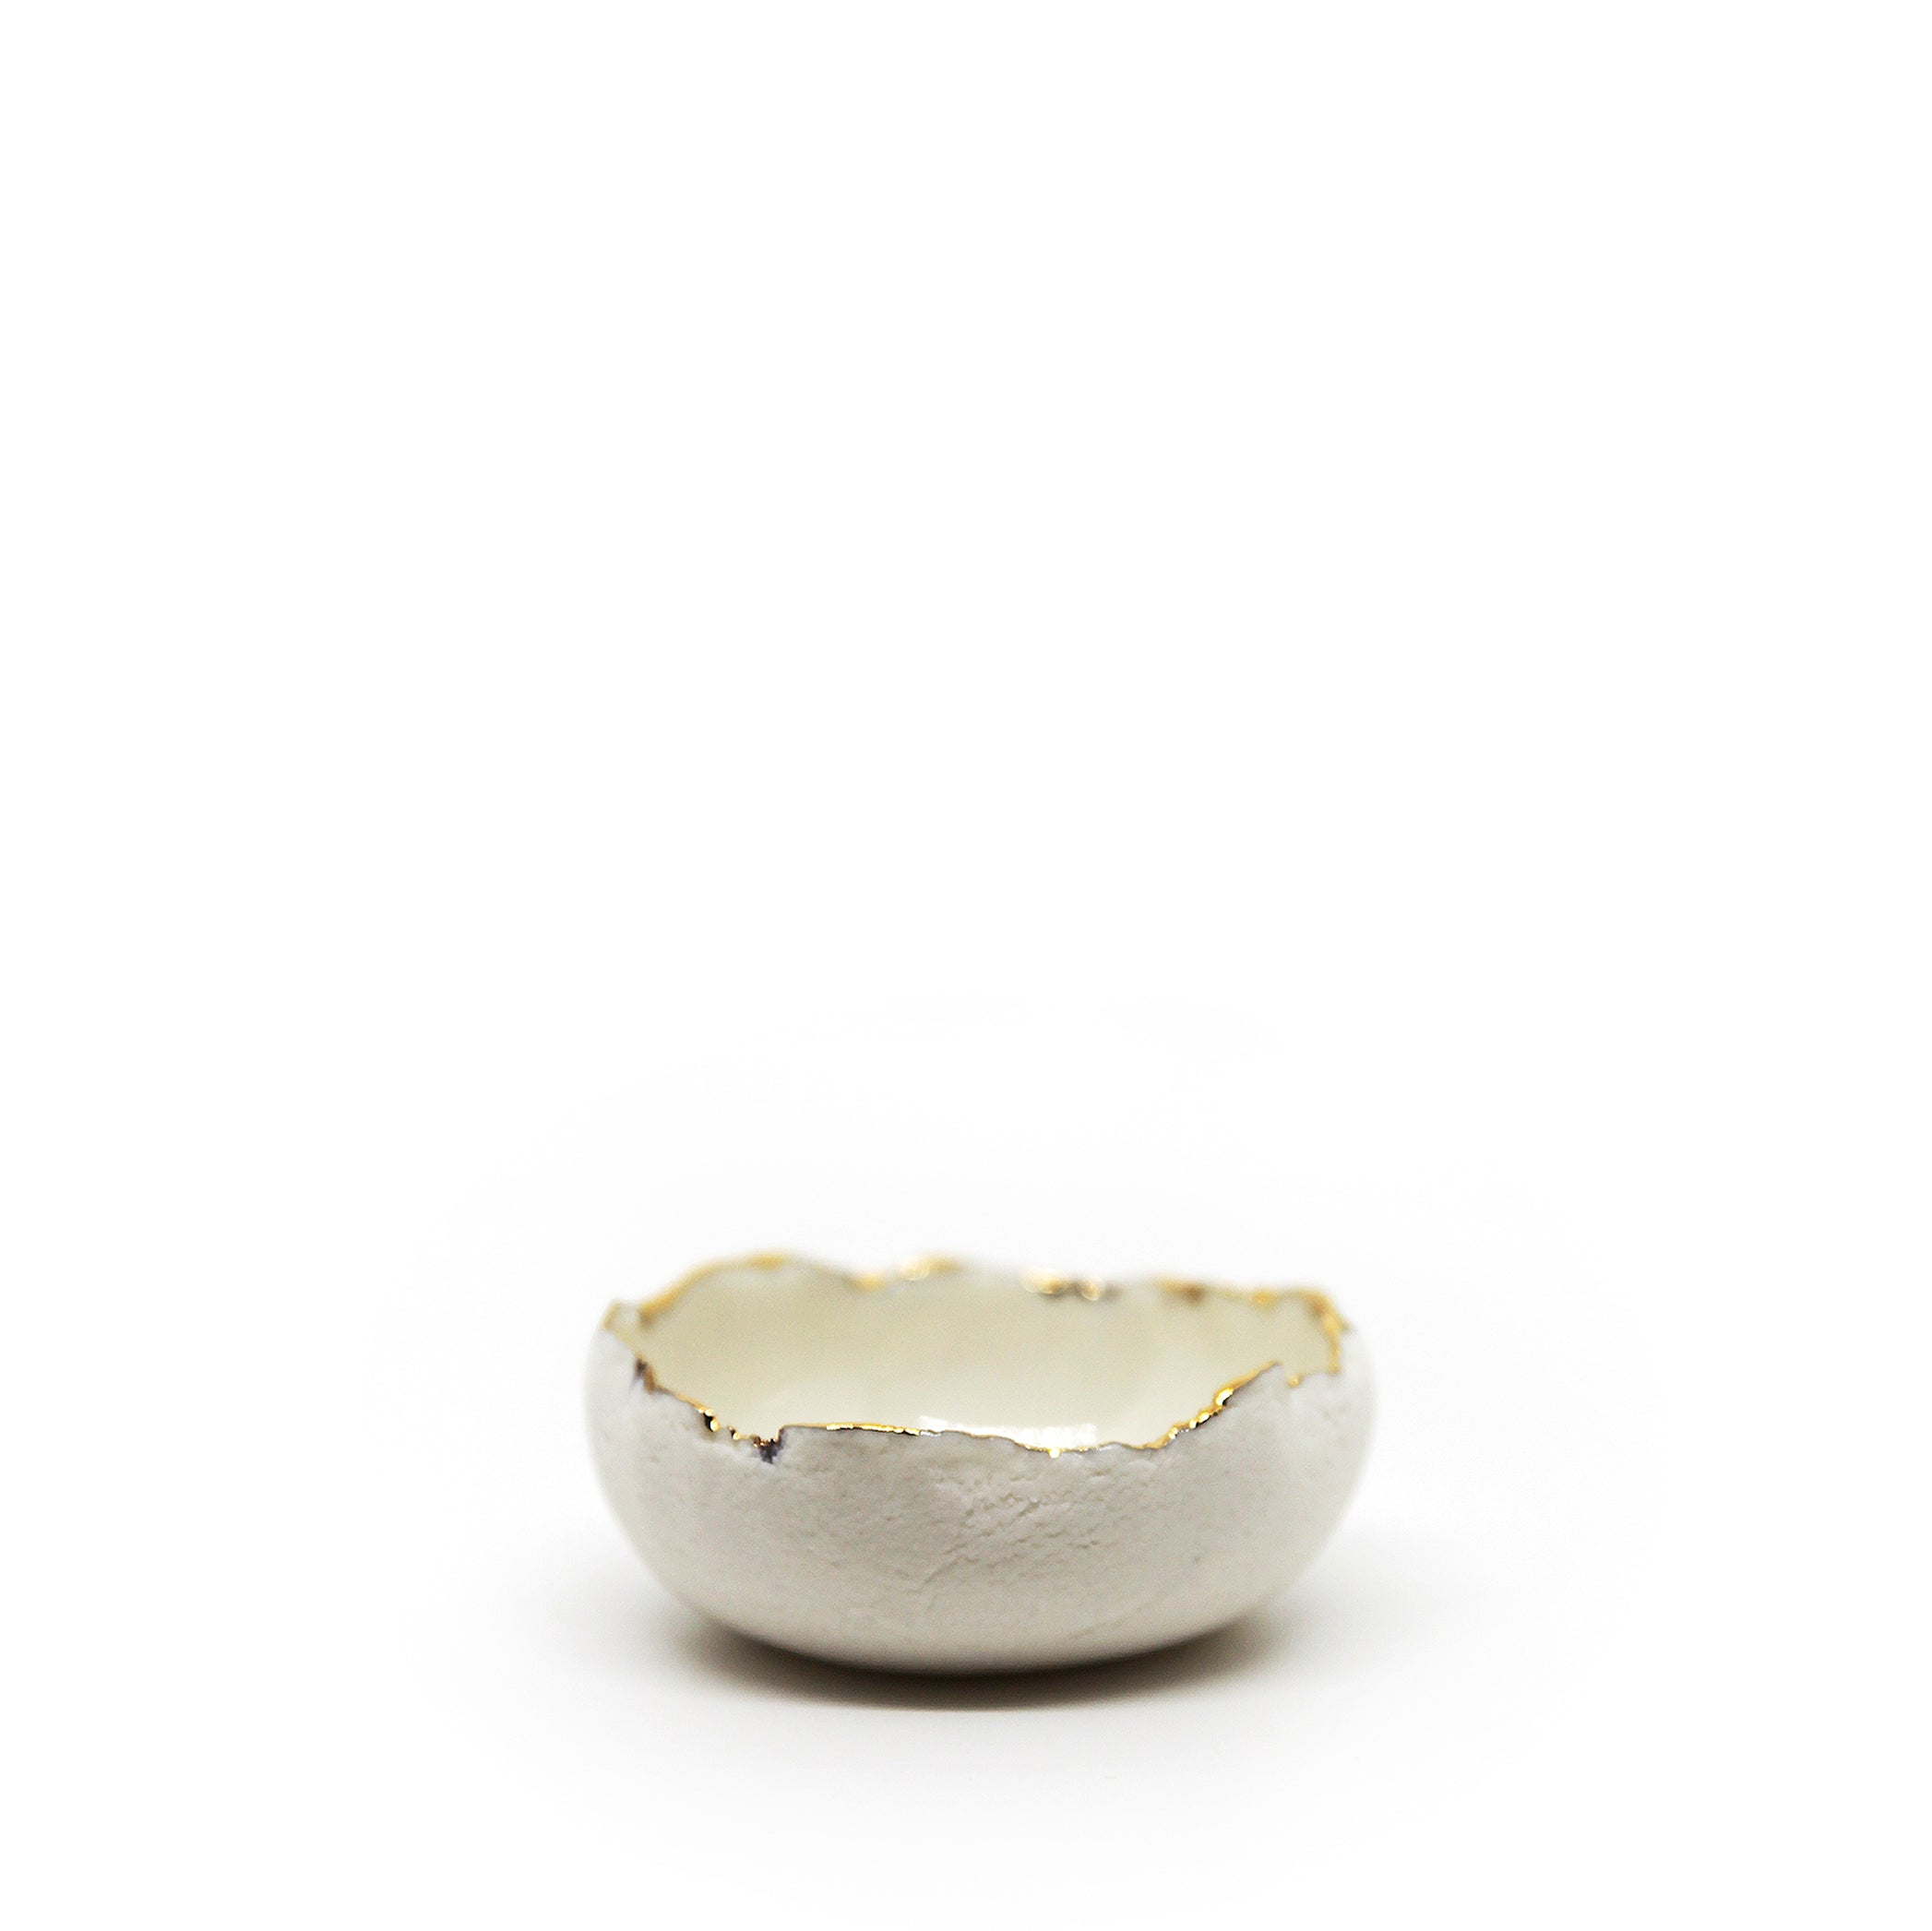 HB Jagged Bowl with Gold Bee, 7cm